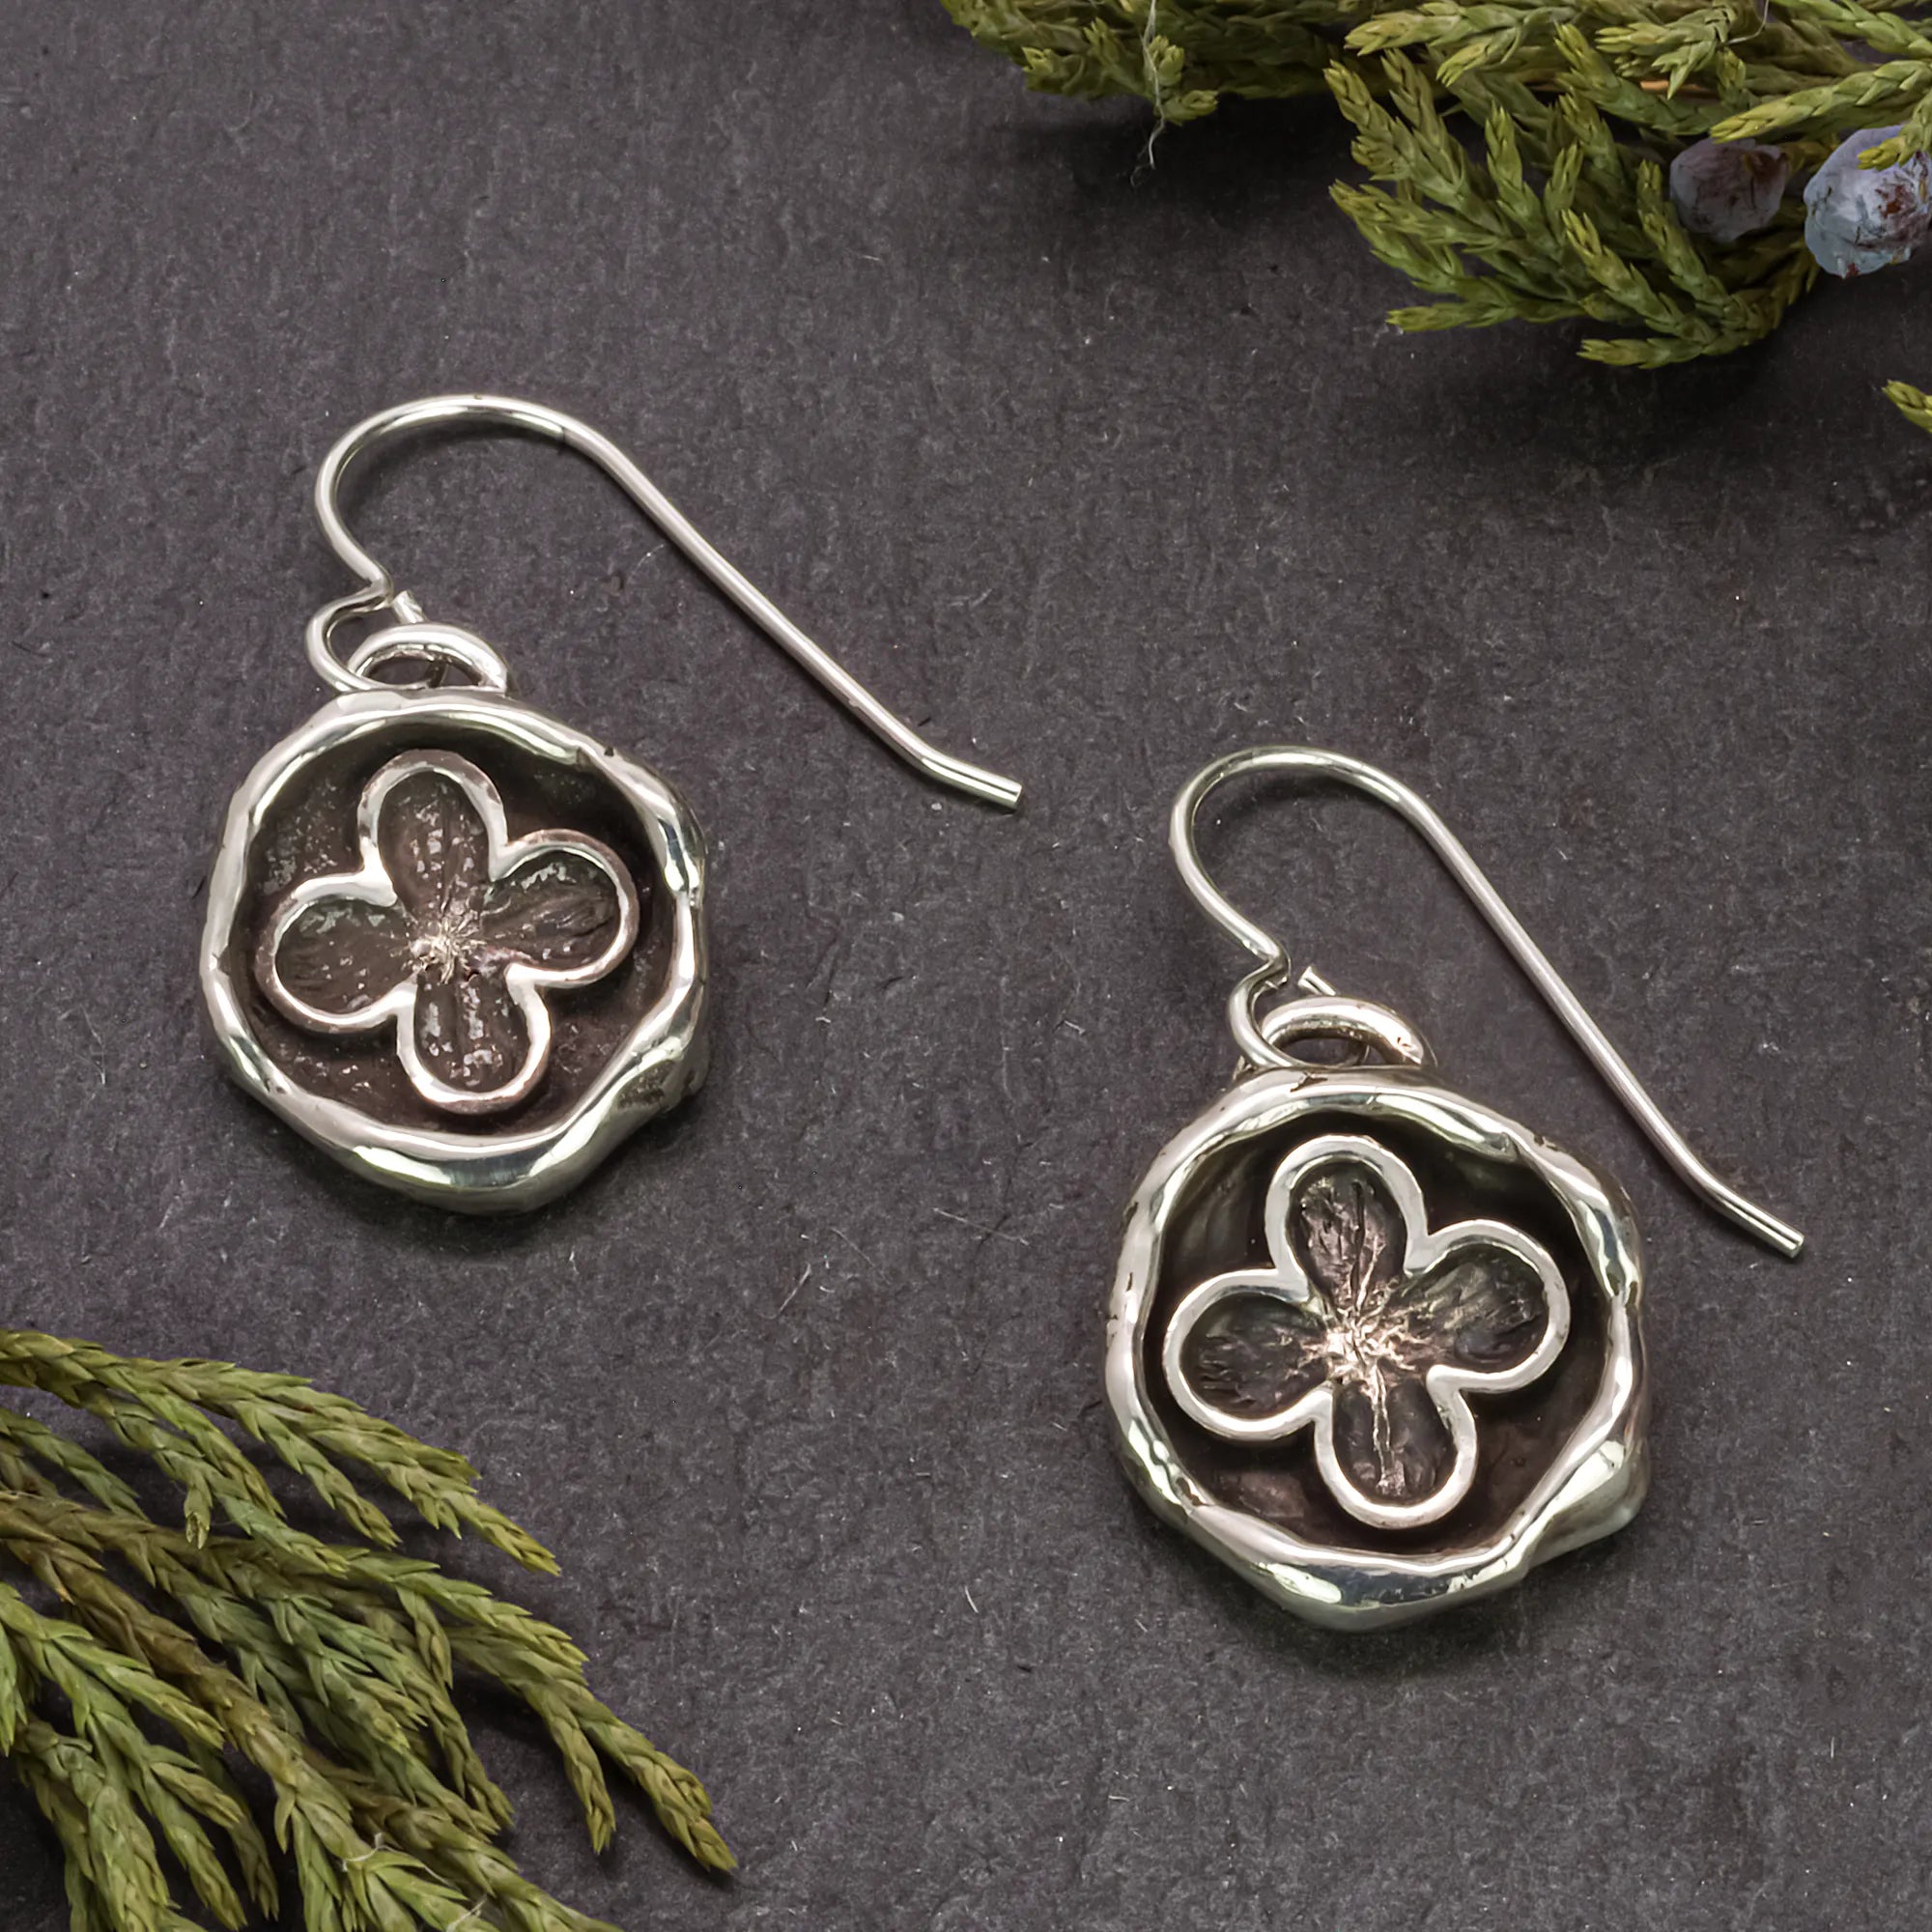 sterling silver ekklesia dangle earrings. Inspired by cathedrals and wax seals. 